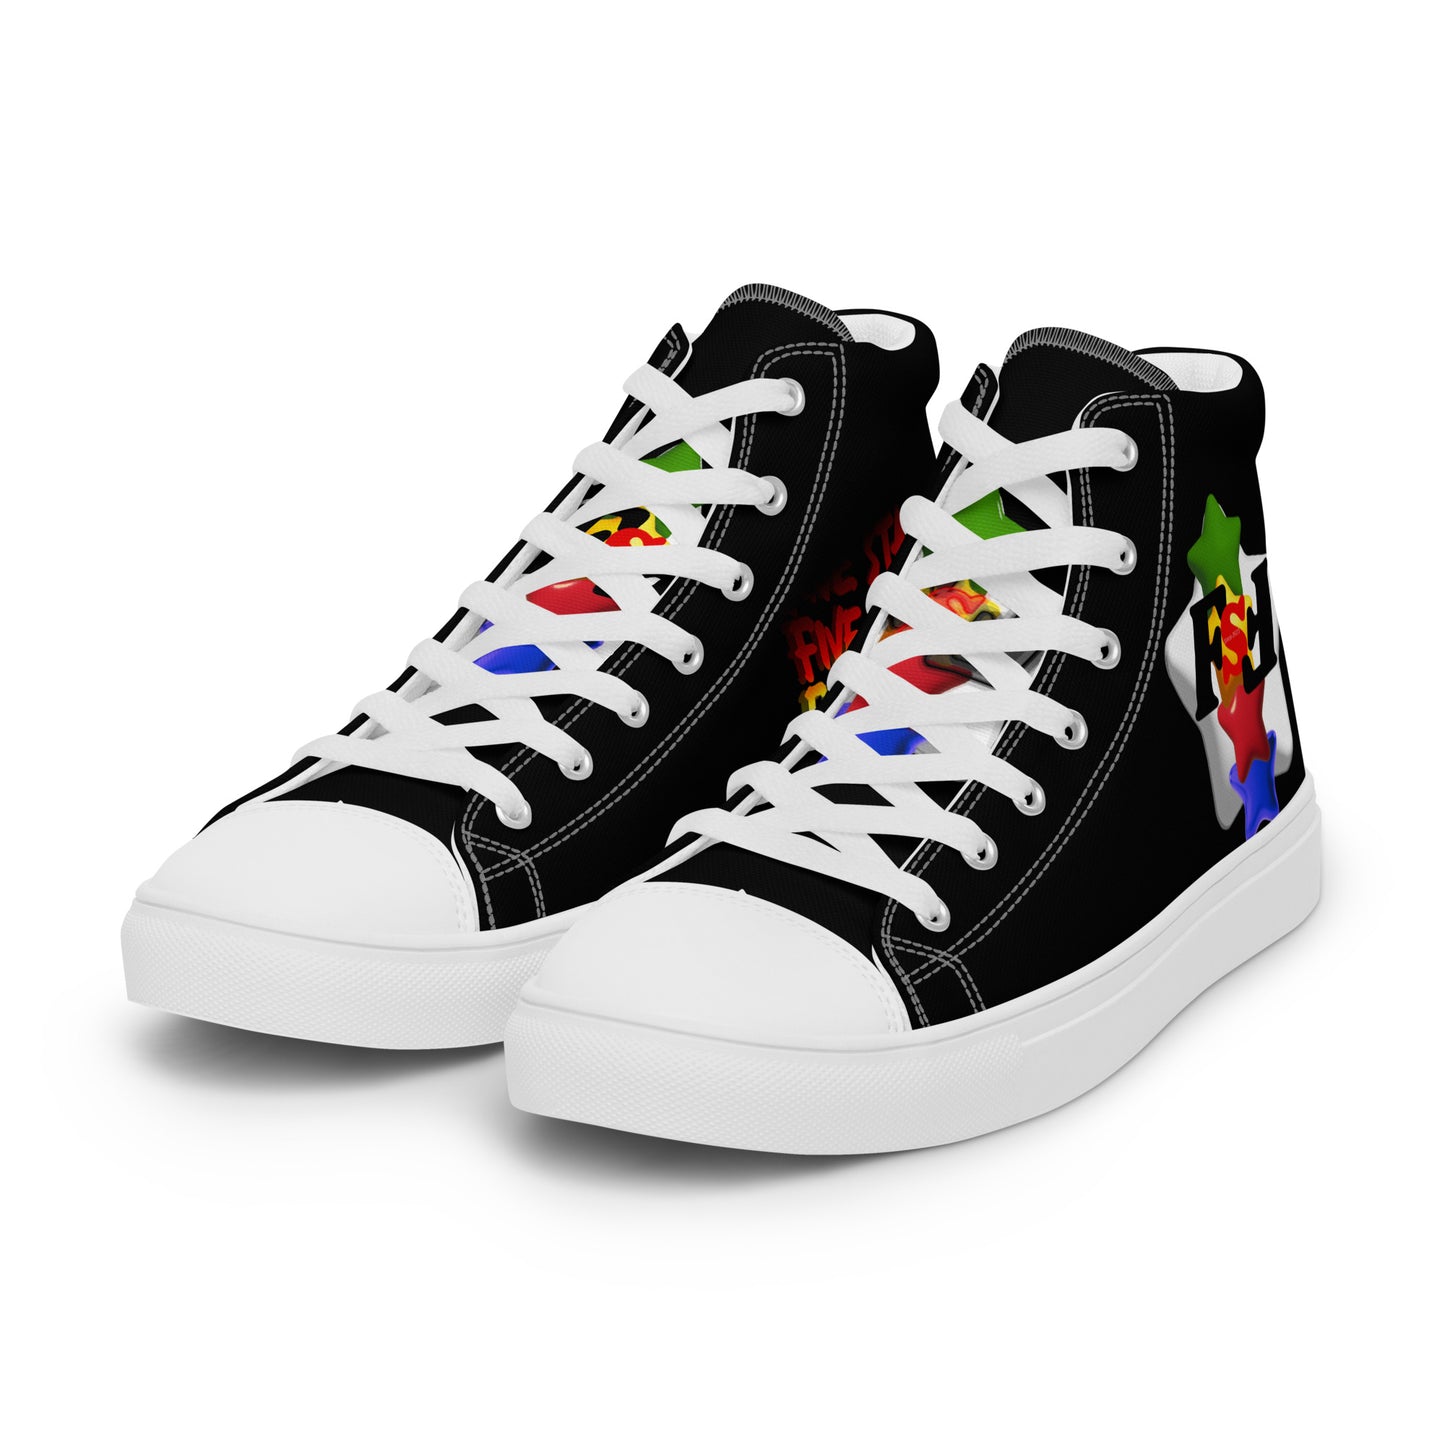 Men’s high top canvas shoes - FSF Stacked 'White Star' Black